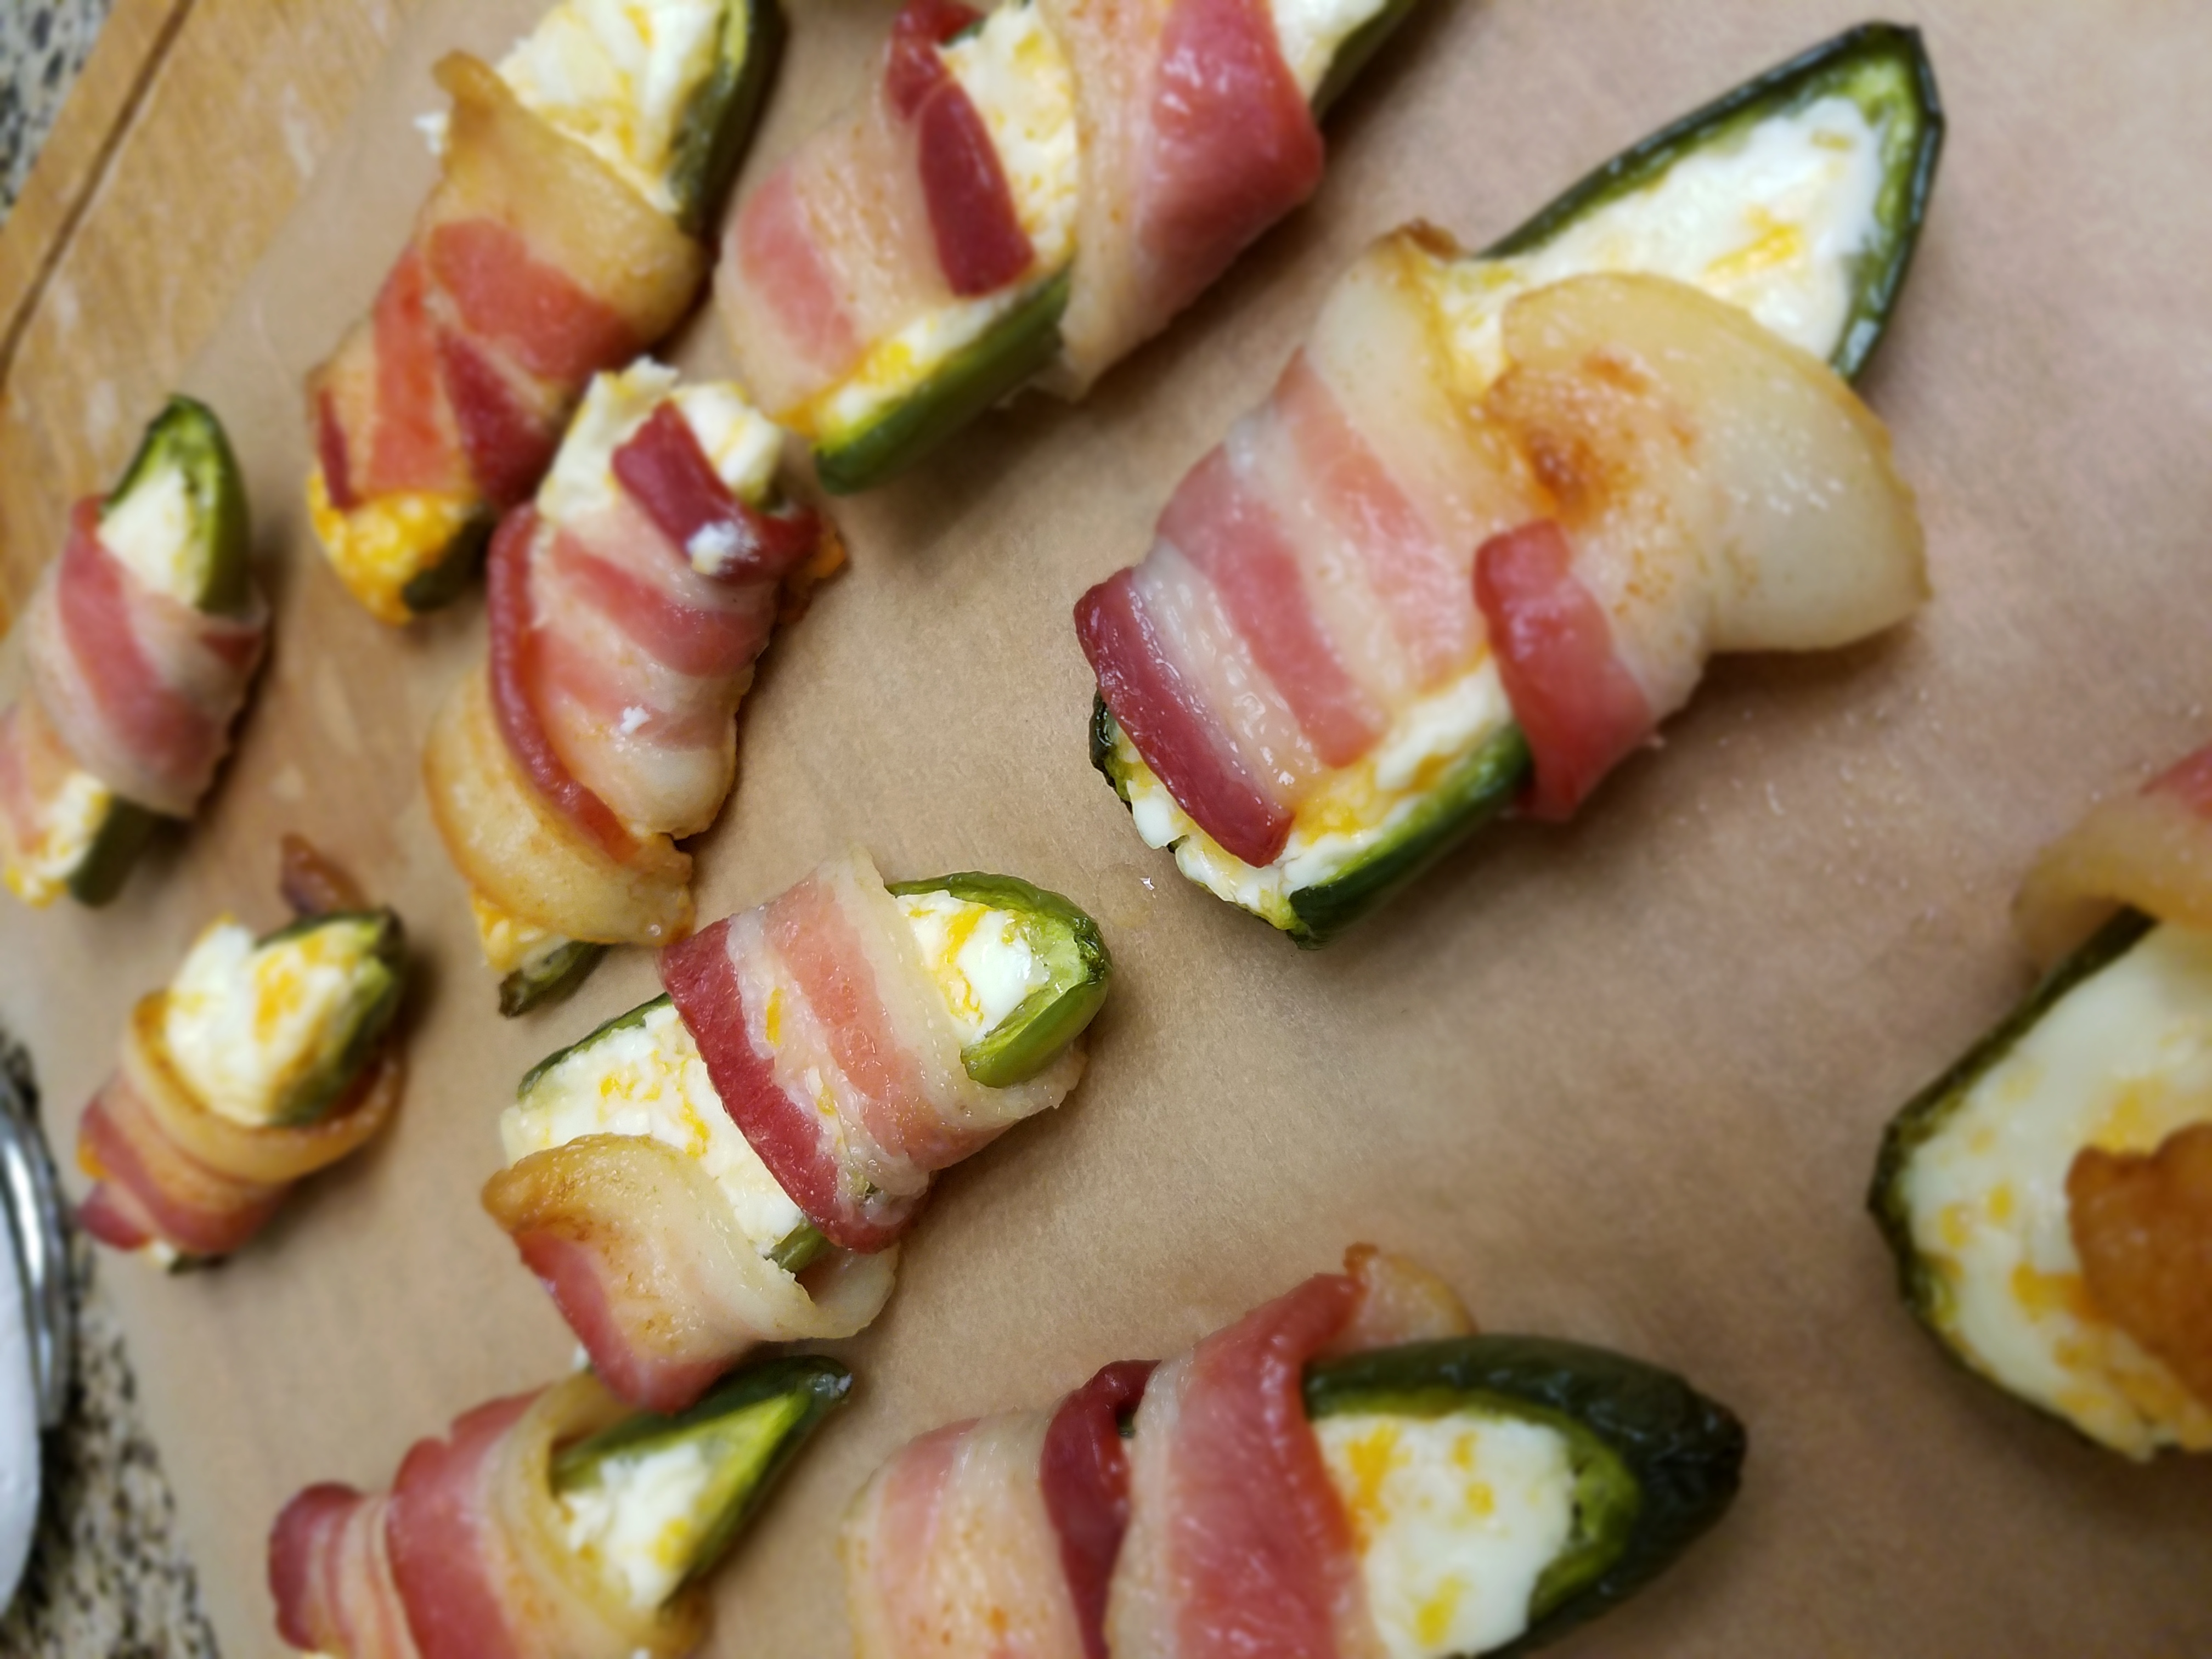 Submitted by Easy Jalapeno Bacon Bites